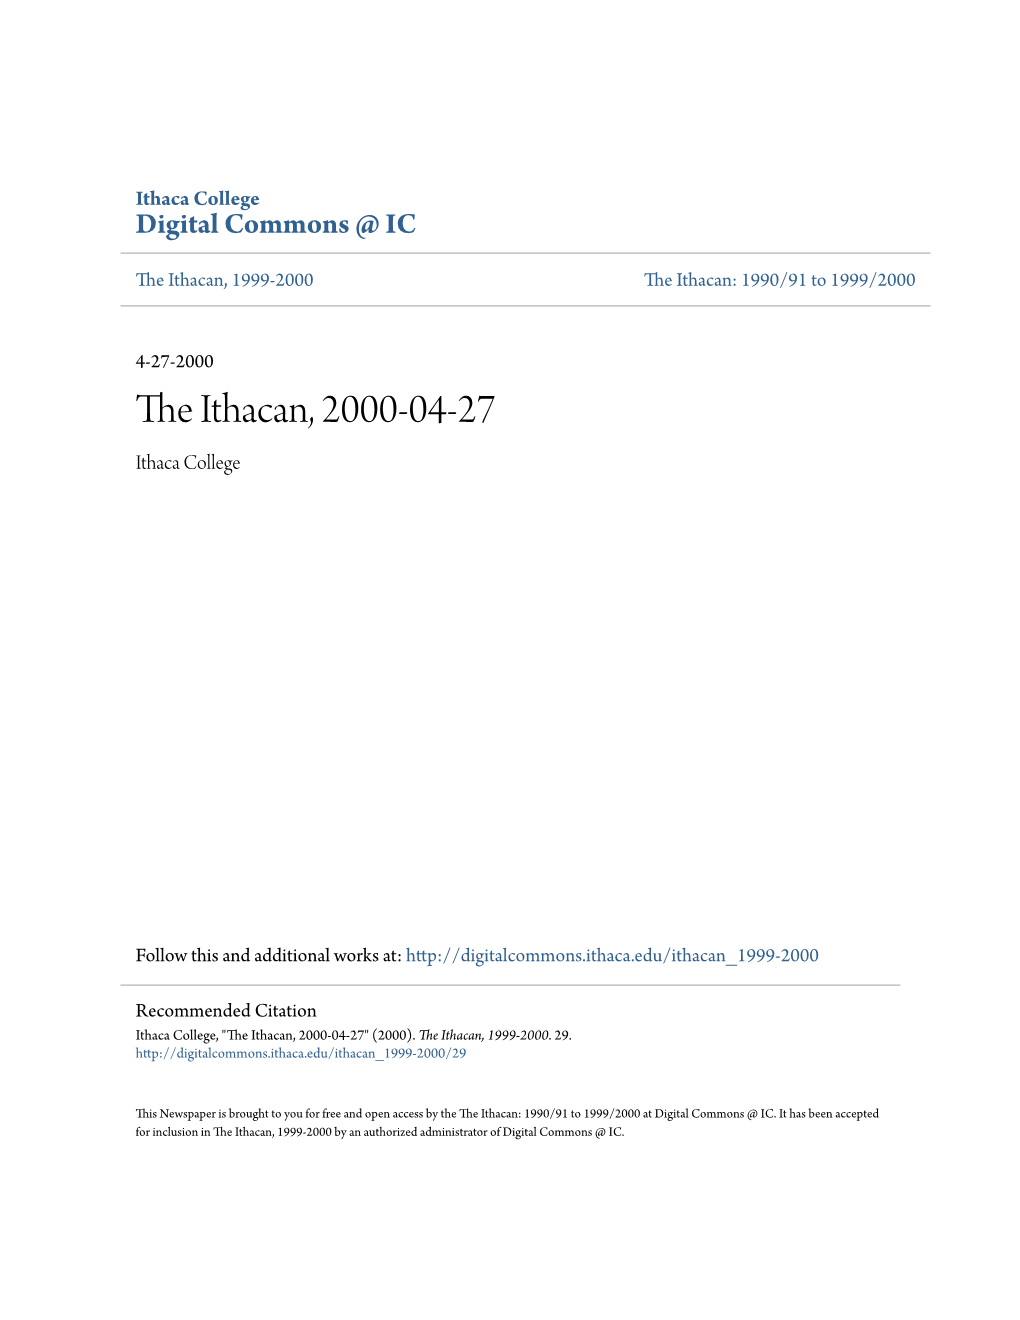 The Ithacan, 2000-04-27